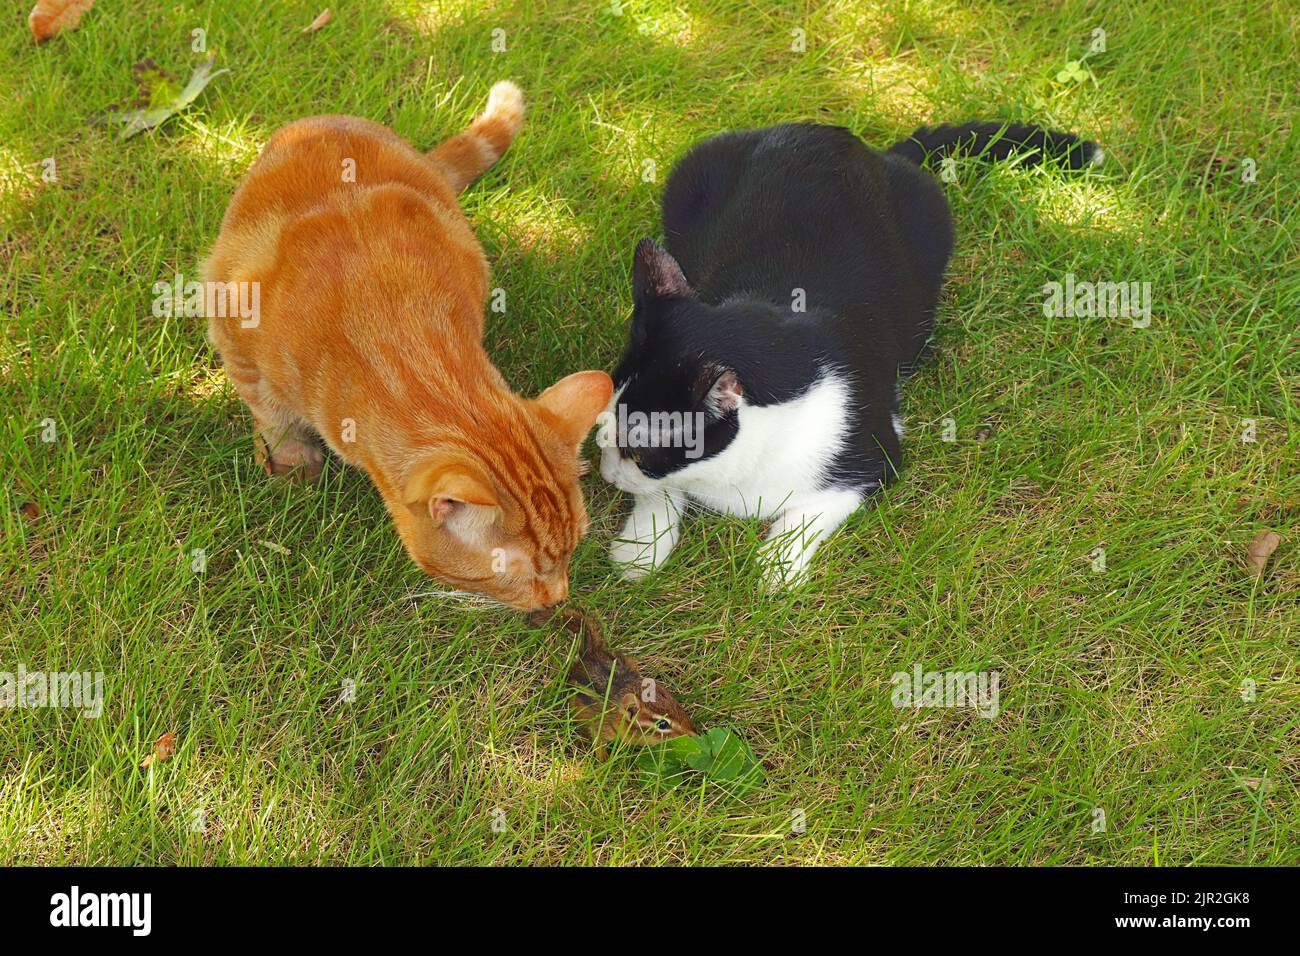 A copper-eyed, orange domestic shorthair classic red tabby and a black and white tuxedo cat (Felis catus) hassling an Eastern chipmunk (Tamias striatu Stock Photo